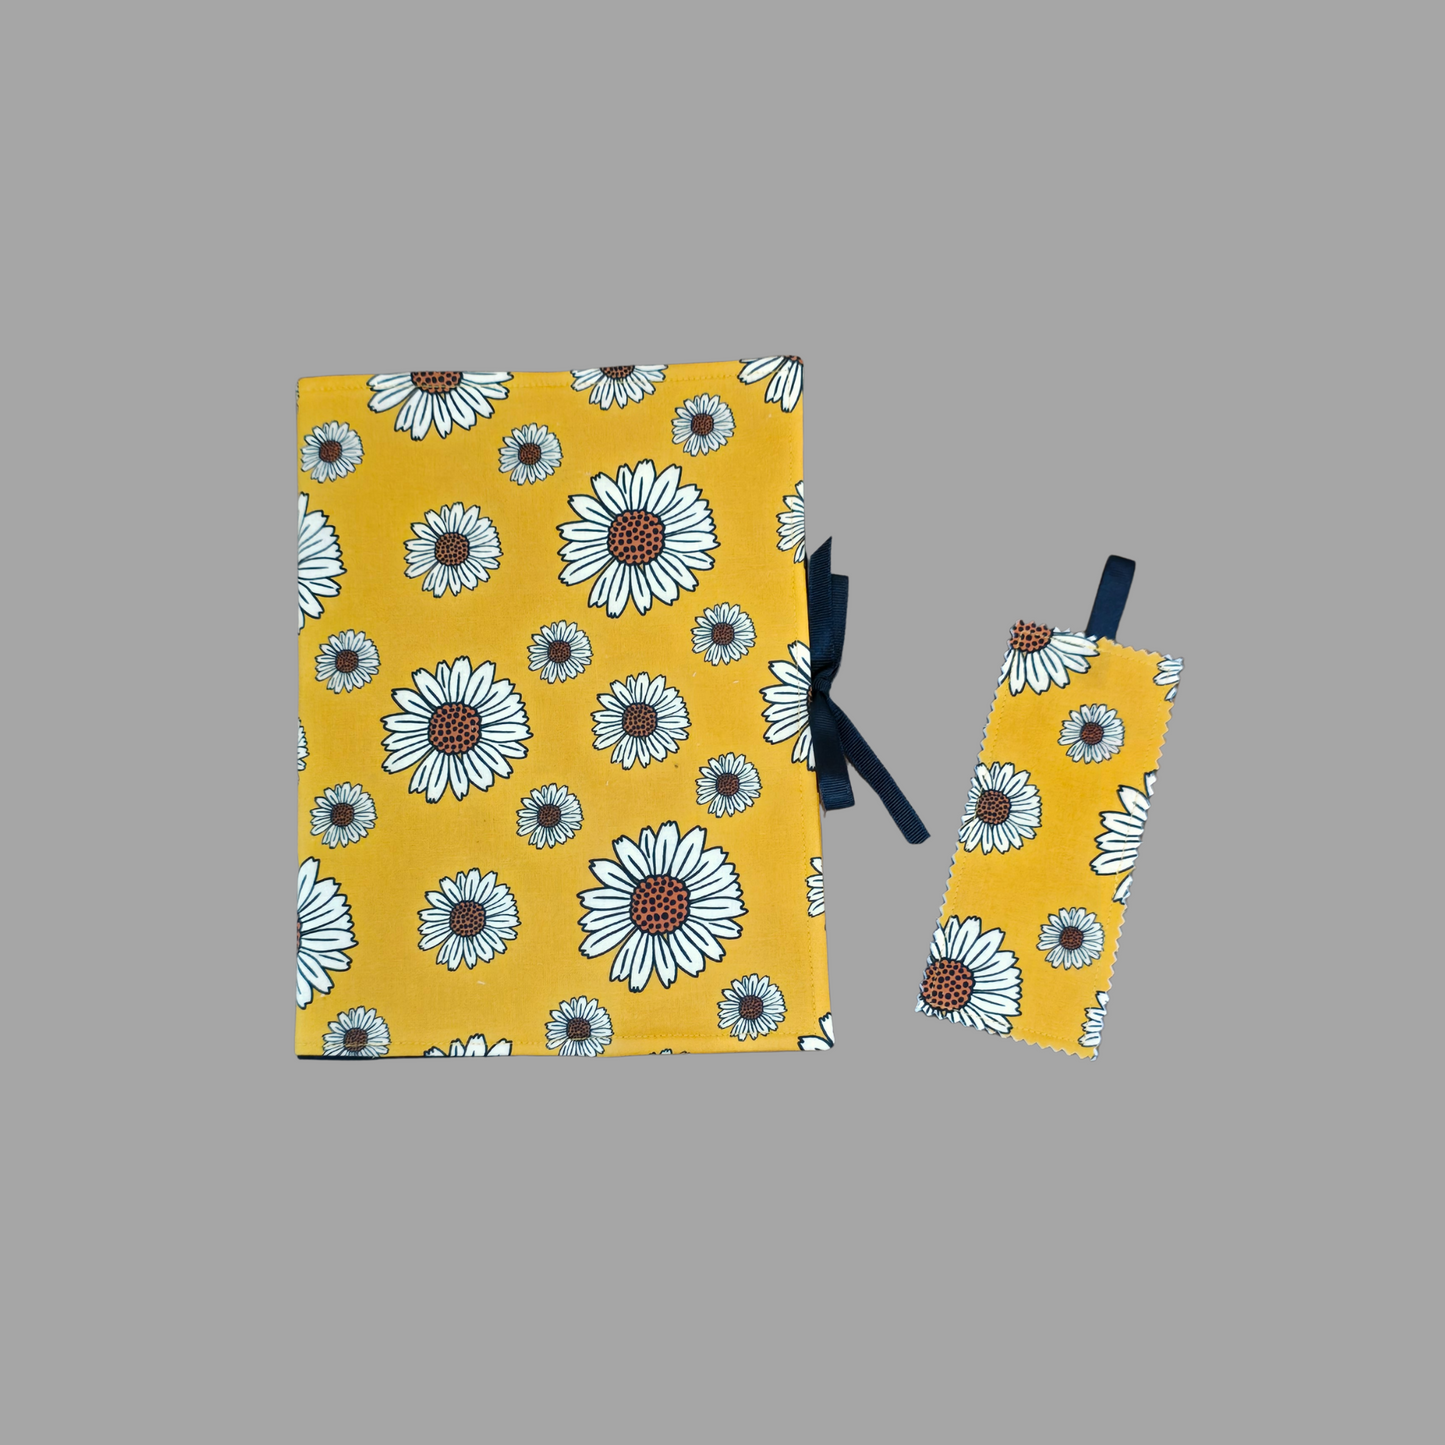 Groovy Daisy Composition Book Cover Far-Out Floral School Office Journal Diary